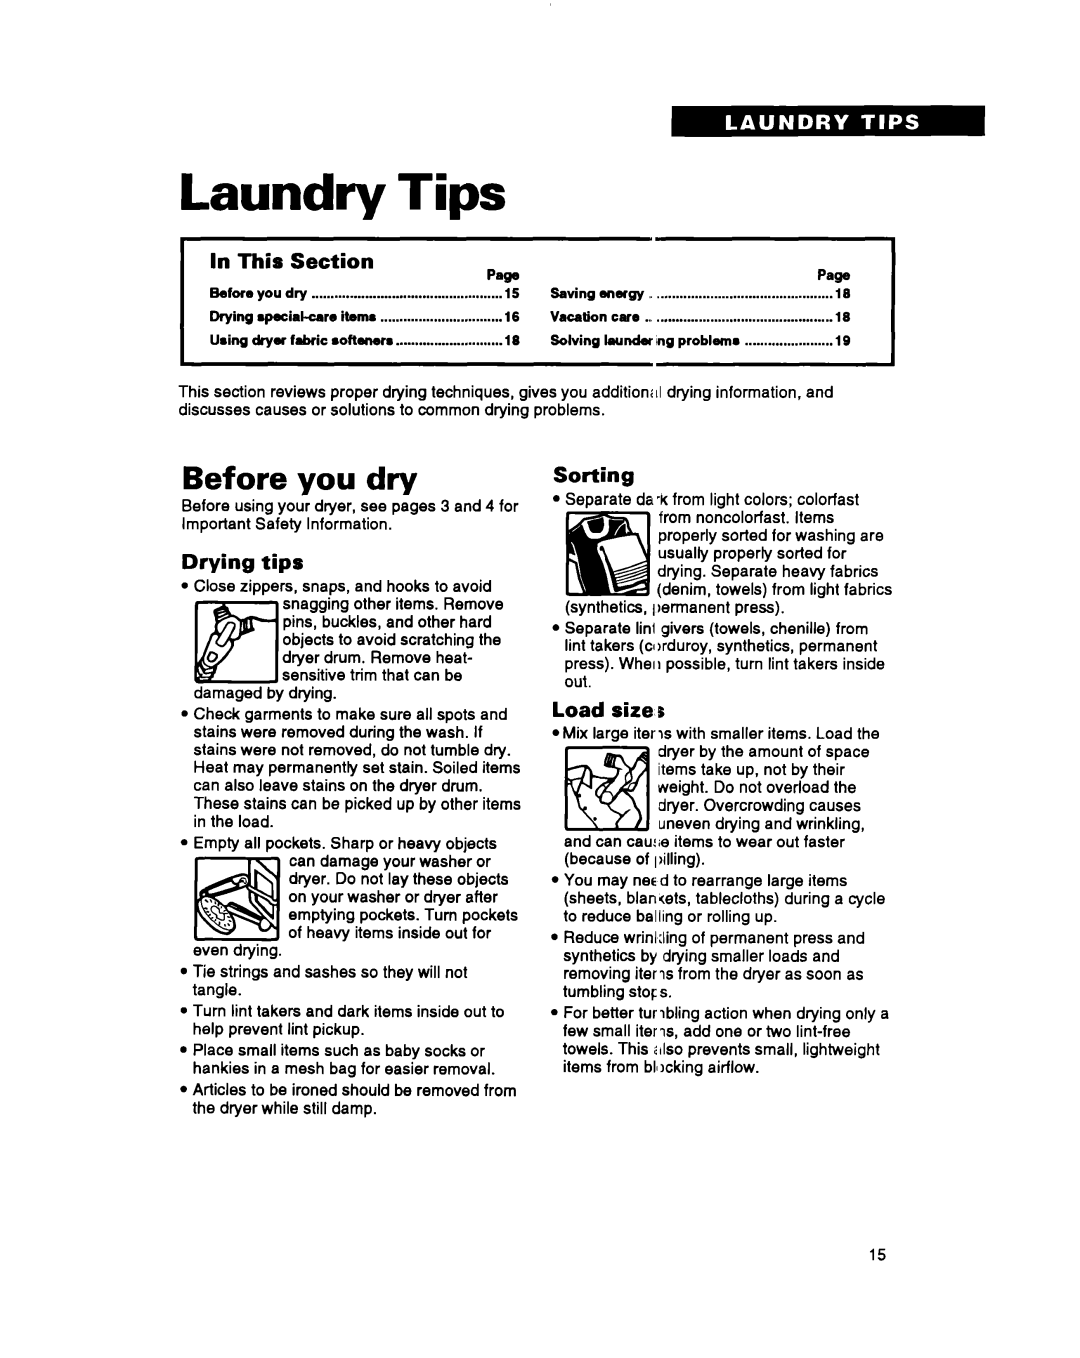 Whirlpool 3396311 manual Laundry Tips, Before you dry, In This Section PawPage, Drying tips, Sorting, Load size’s 